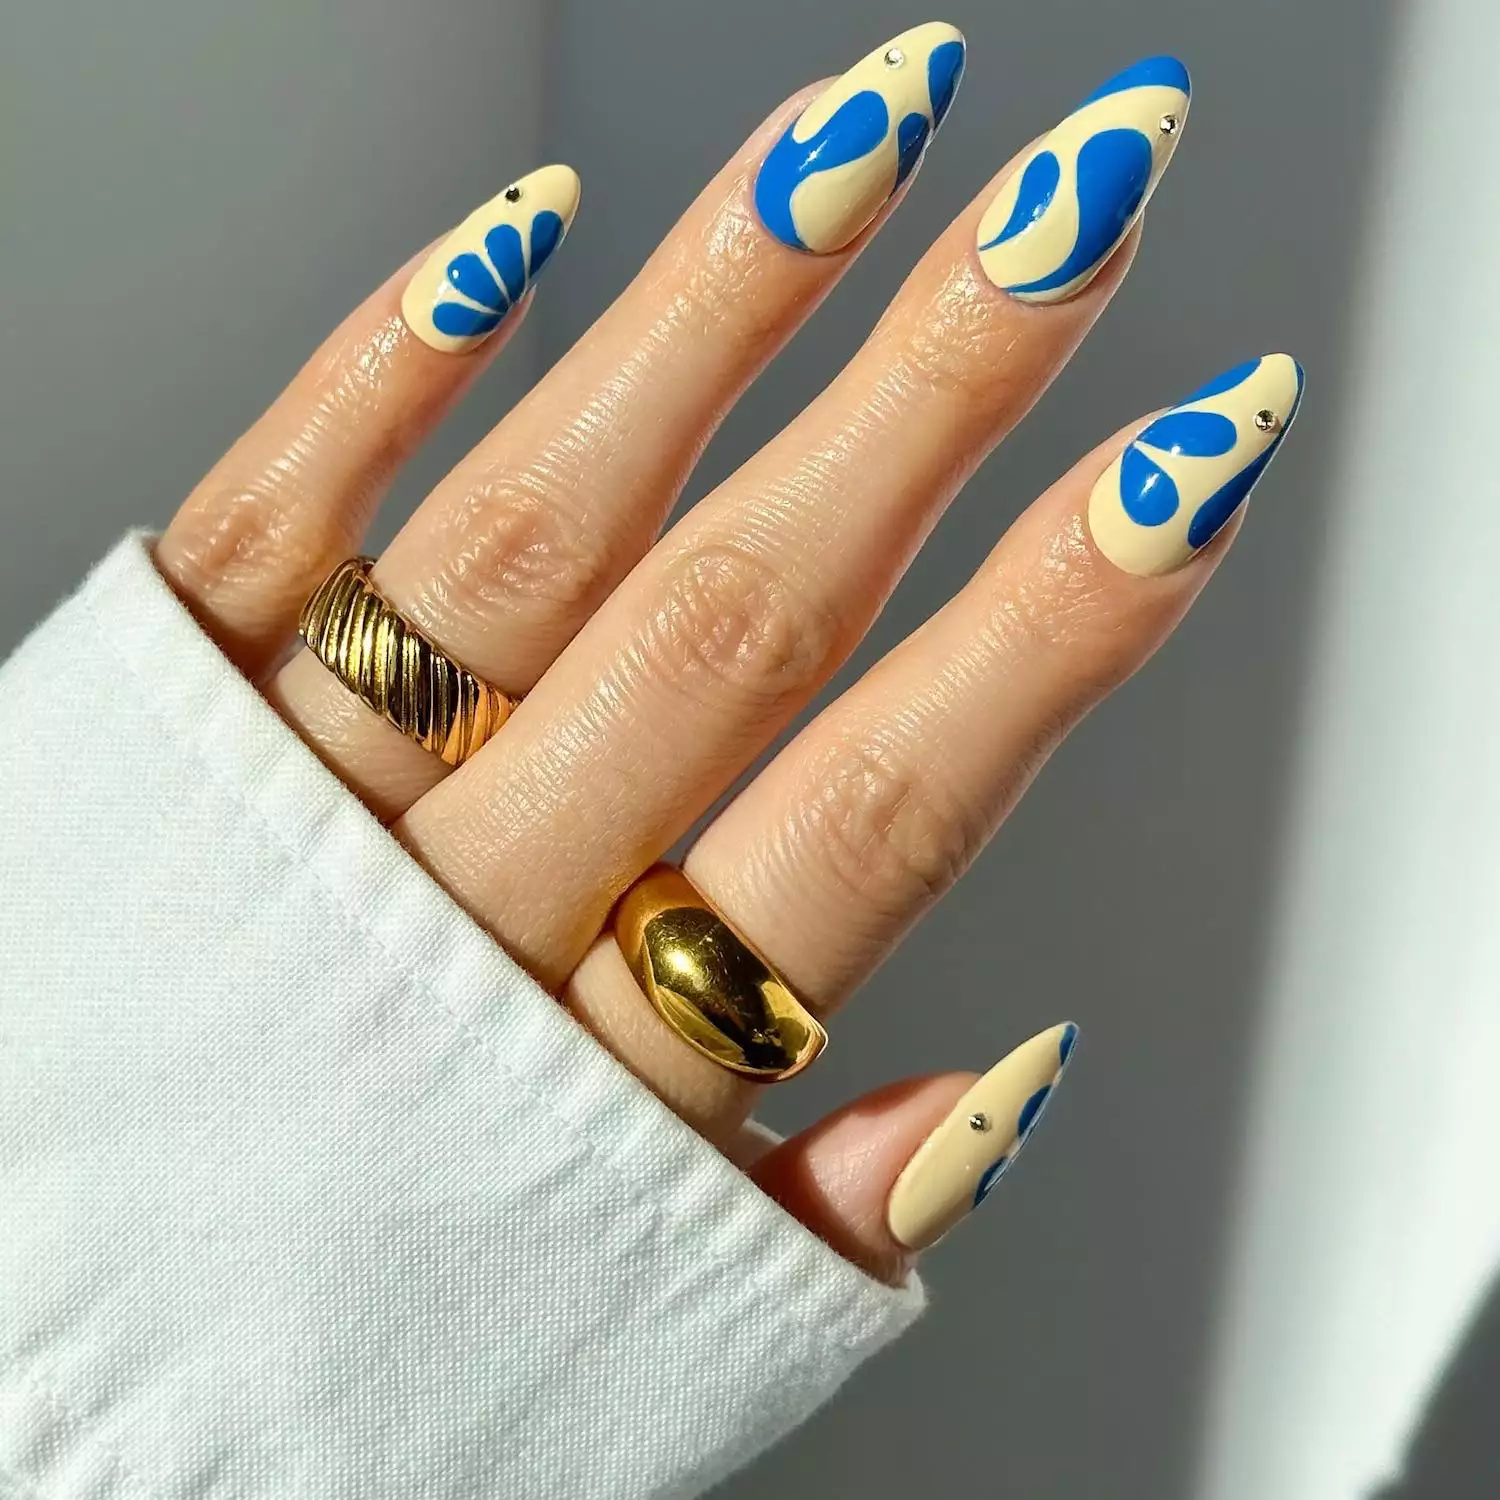 Ivory manicure with abstract cobalt blue designs and rhinestone details